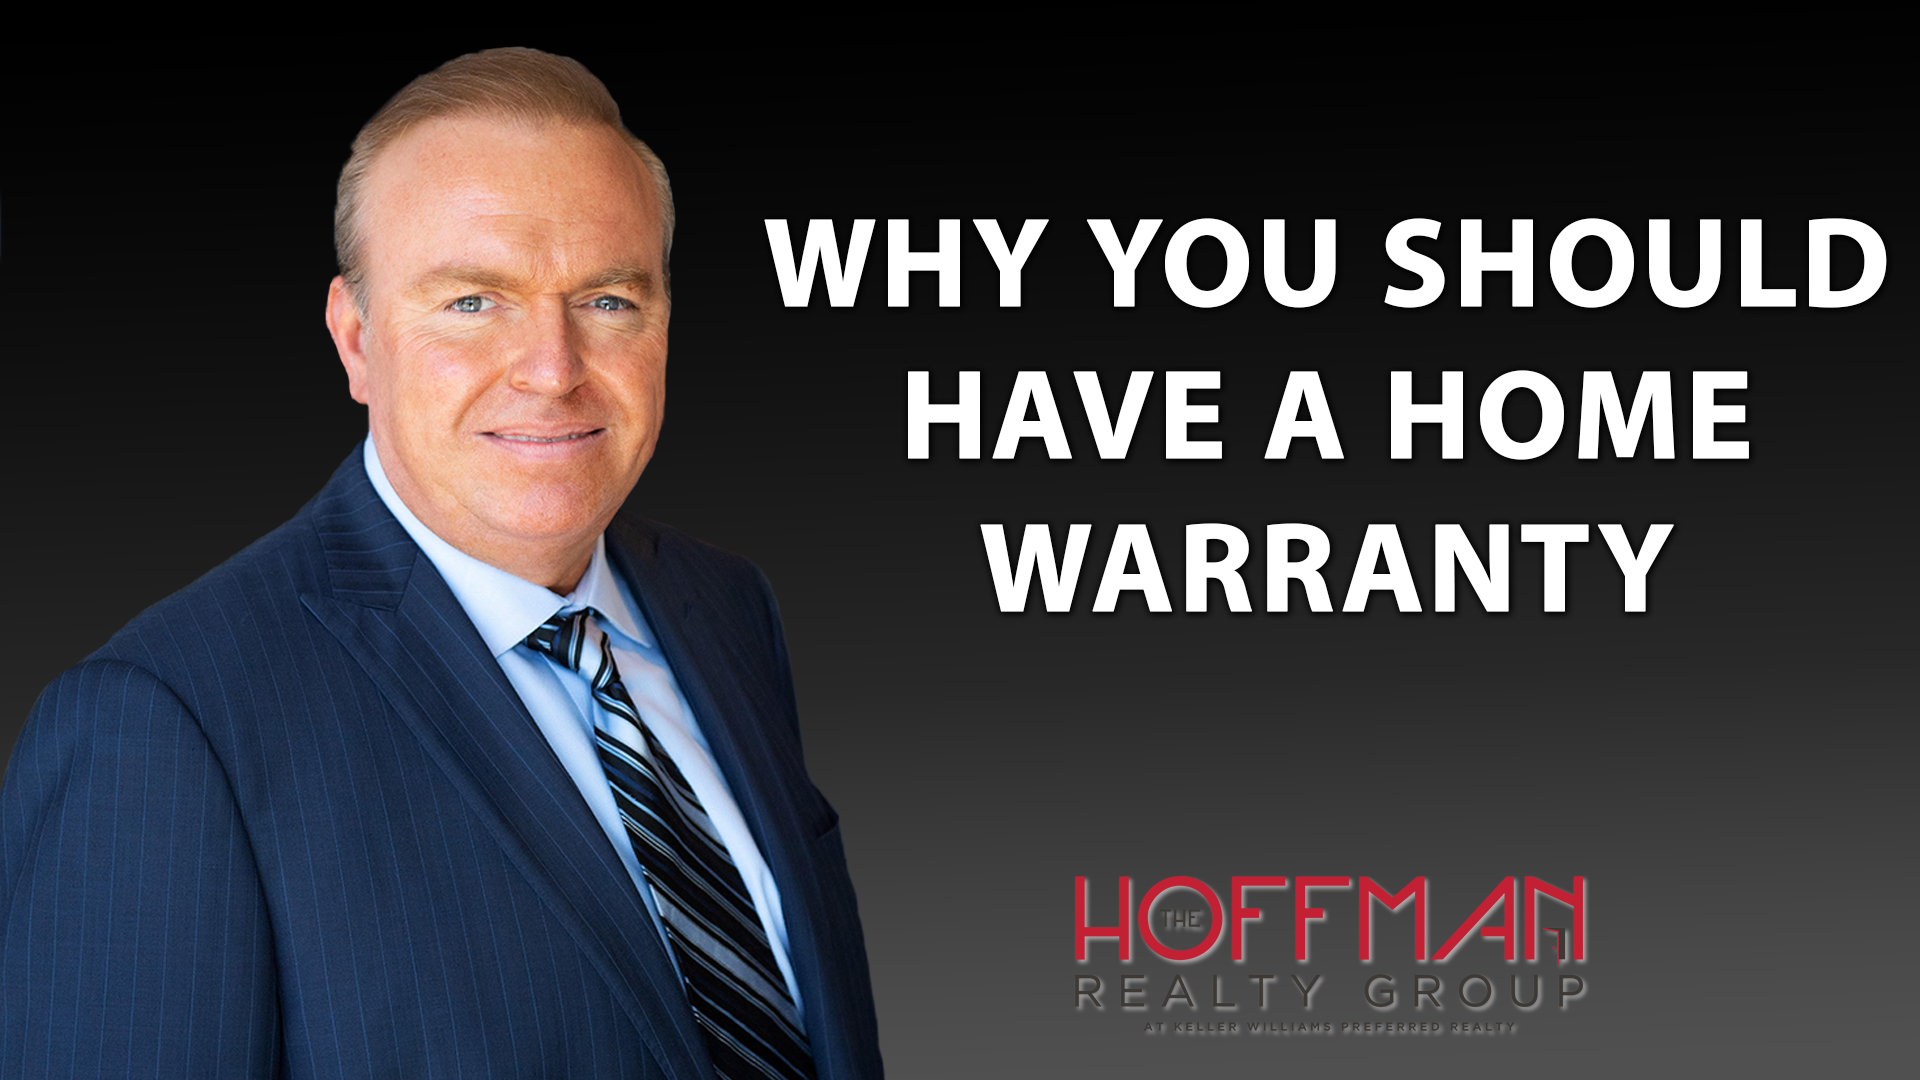 What’s So Great About Home Warranties?